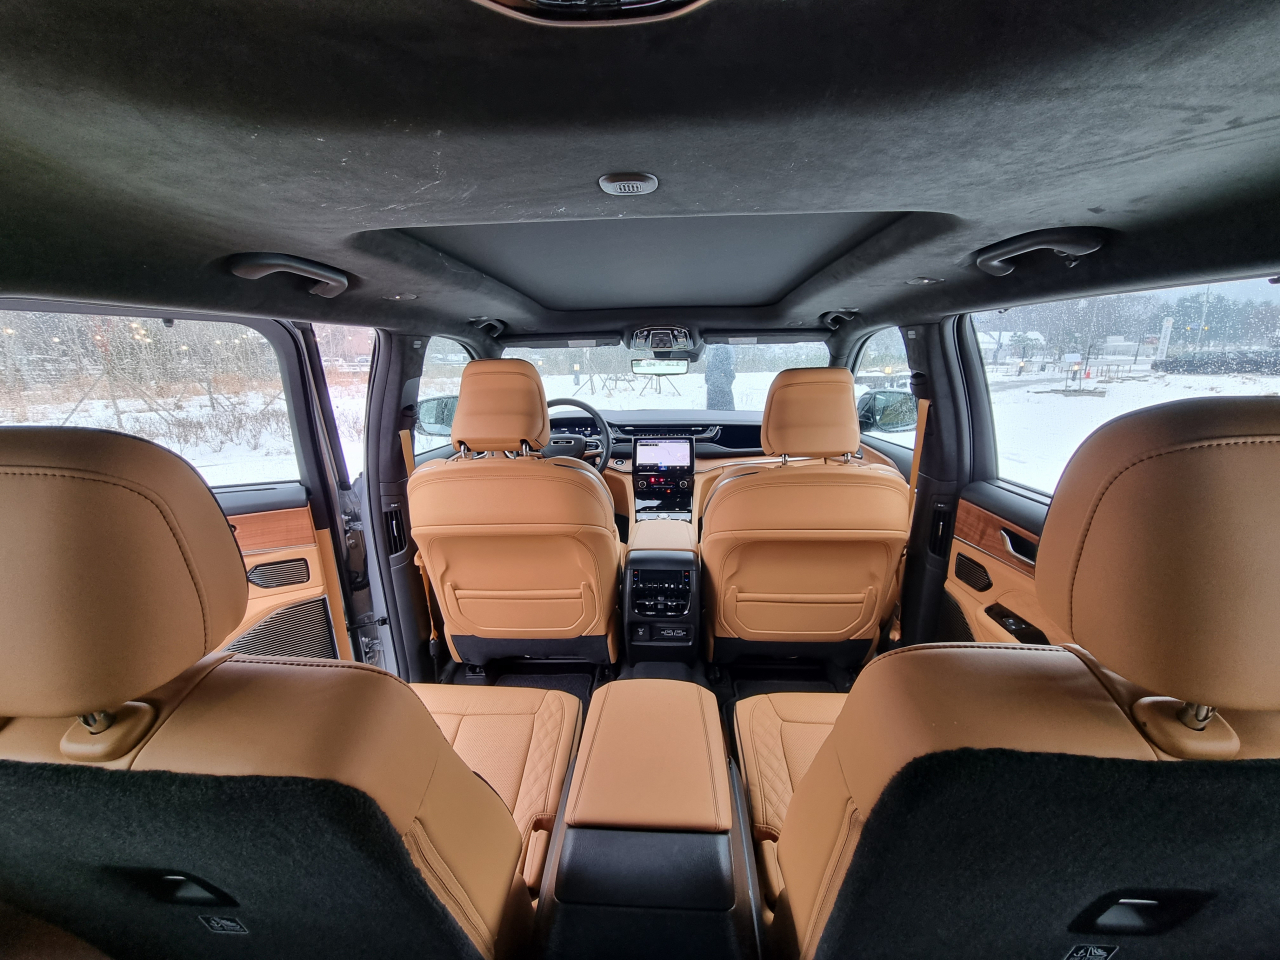 An interior view of Jeep's all-new Grand Cherokee from the backseat (Kan Hyeong-woo/The Korea Herald)